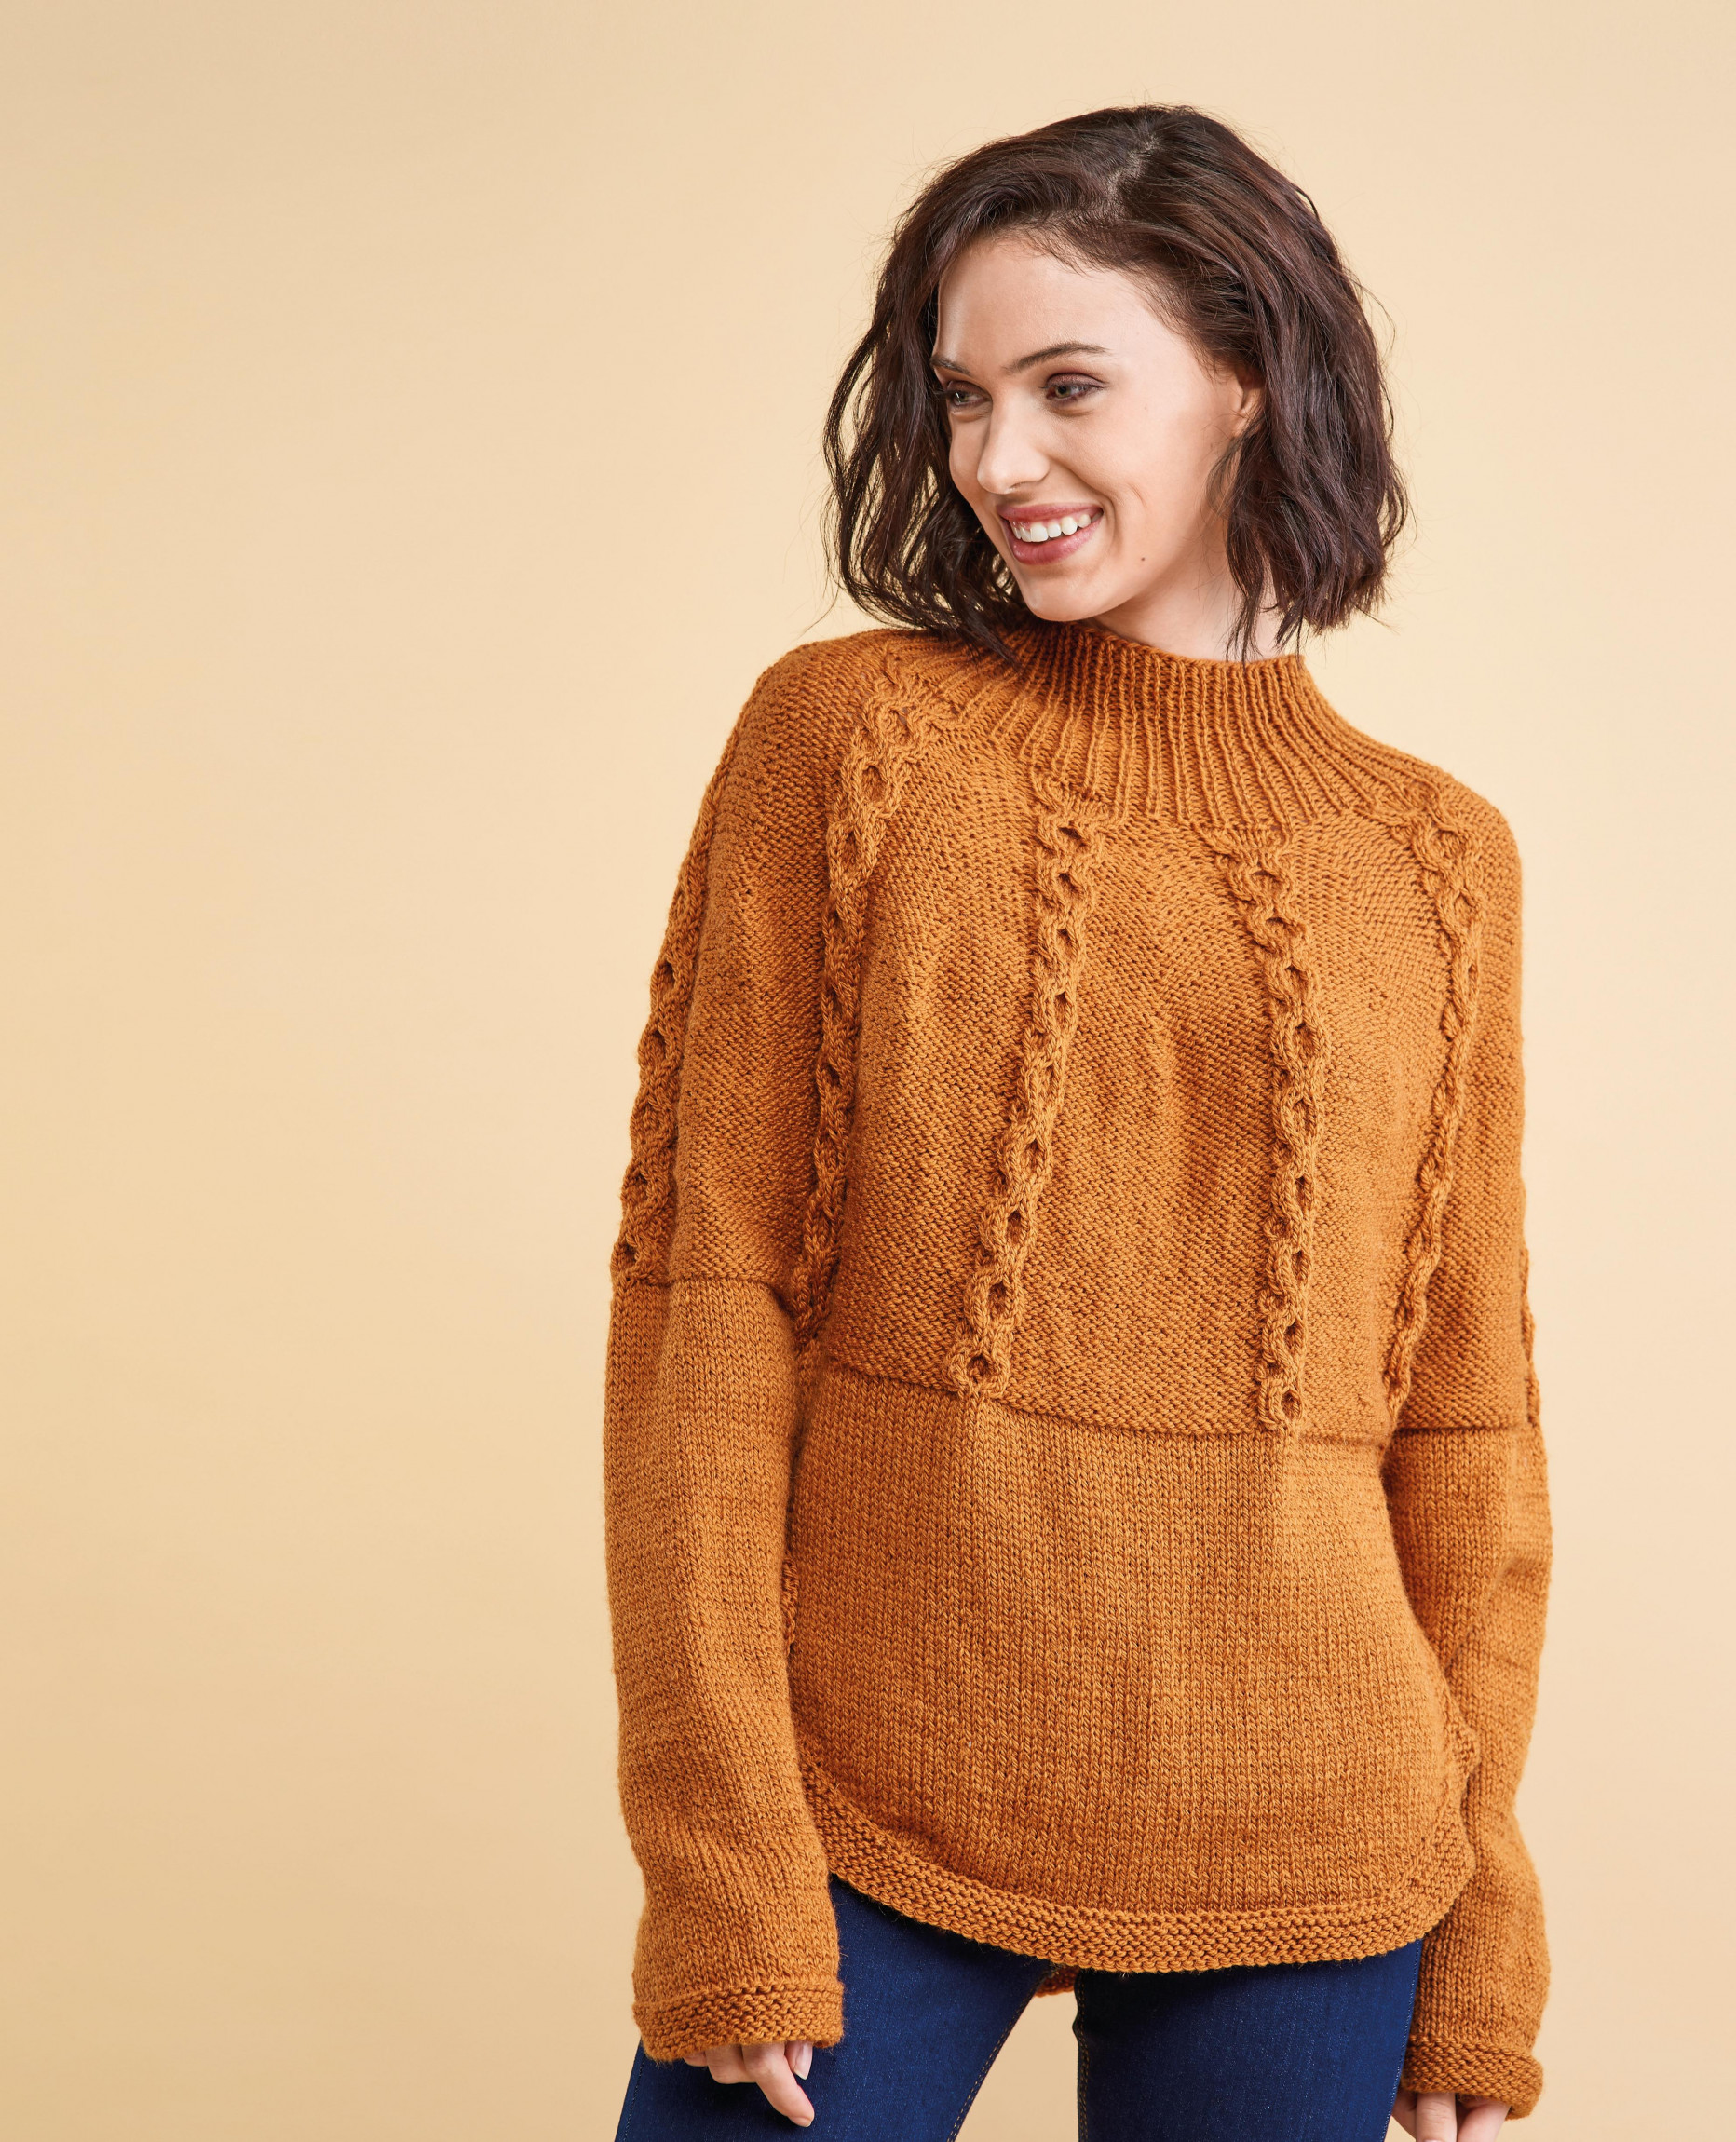 https://www.letsknit.co.uk/images/content/pattern-images/Curved_Yoke_Cable_Sweater_1.jpg